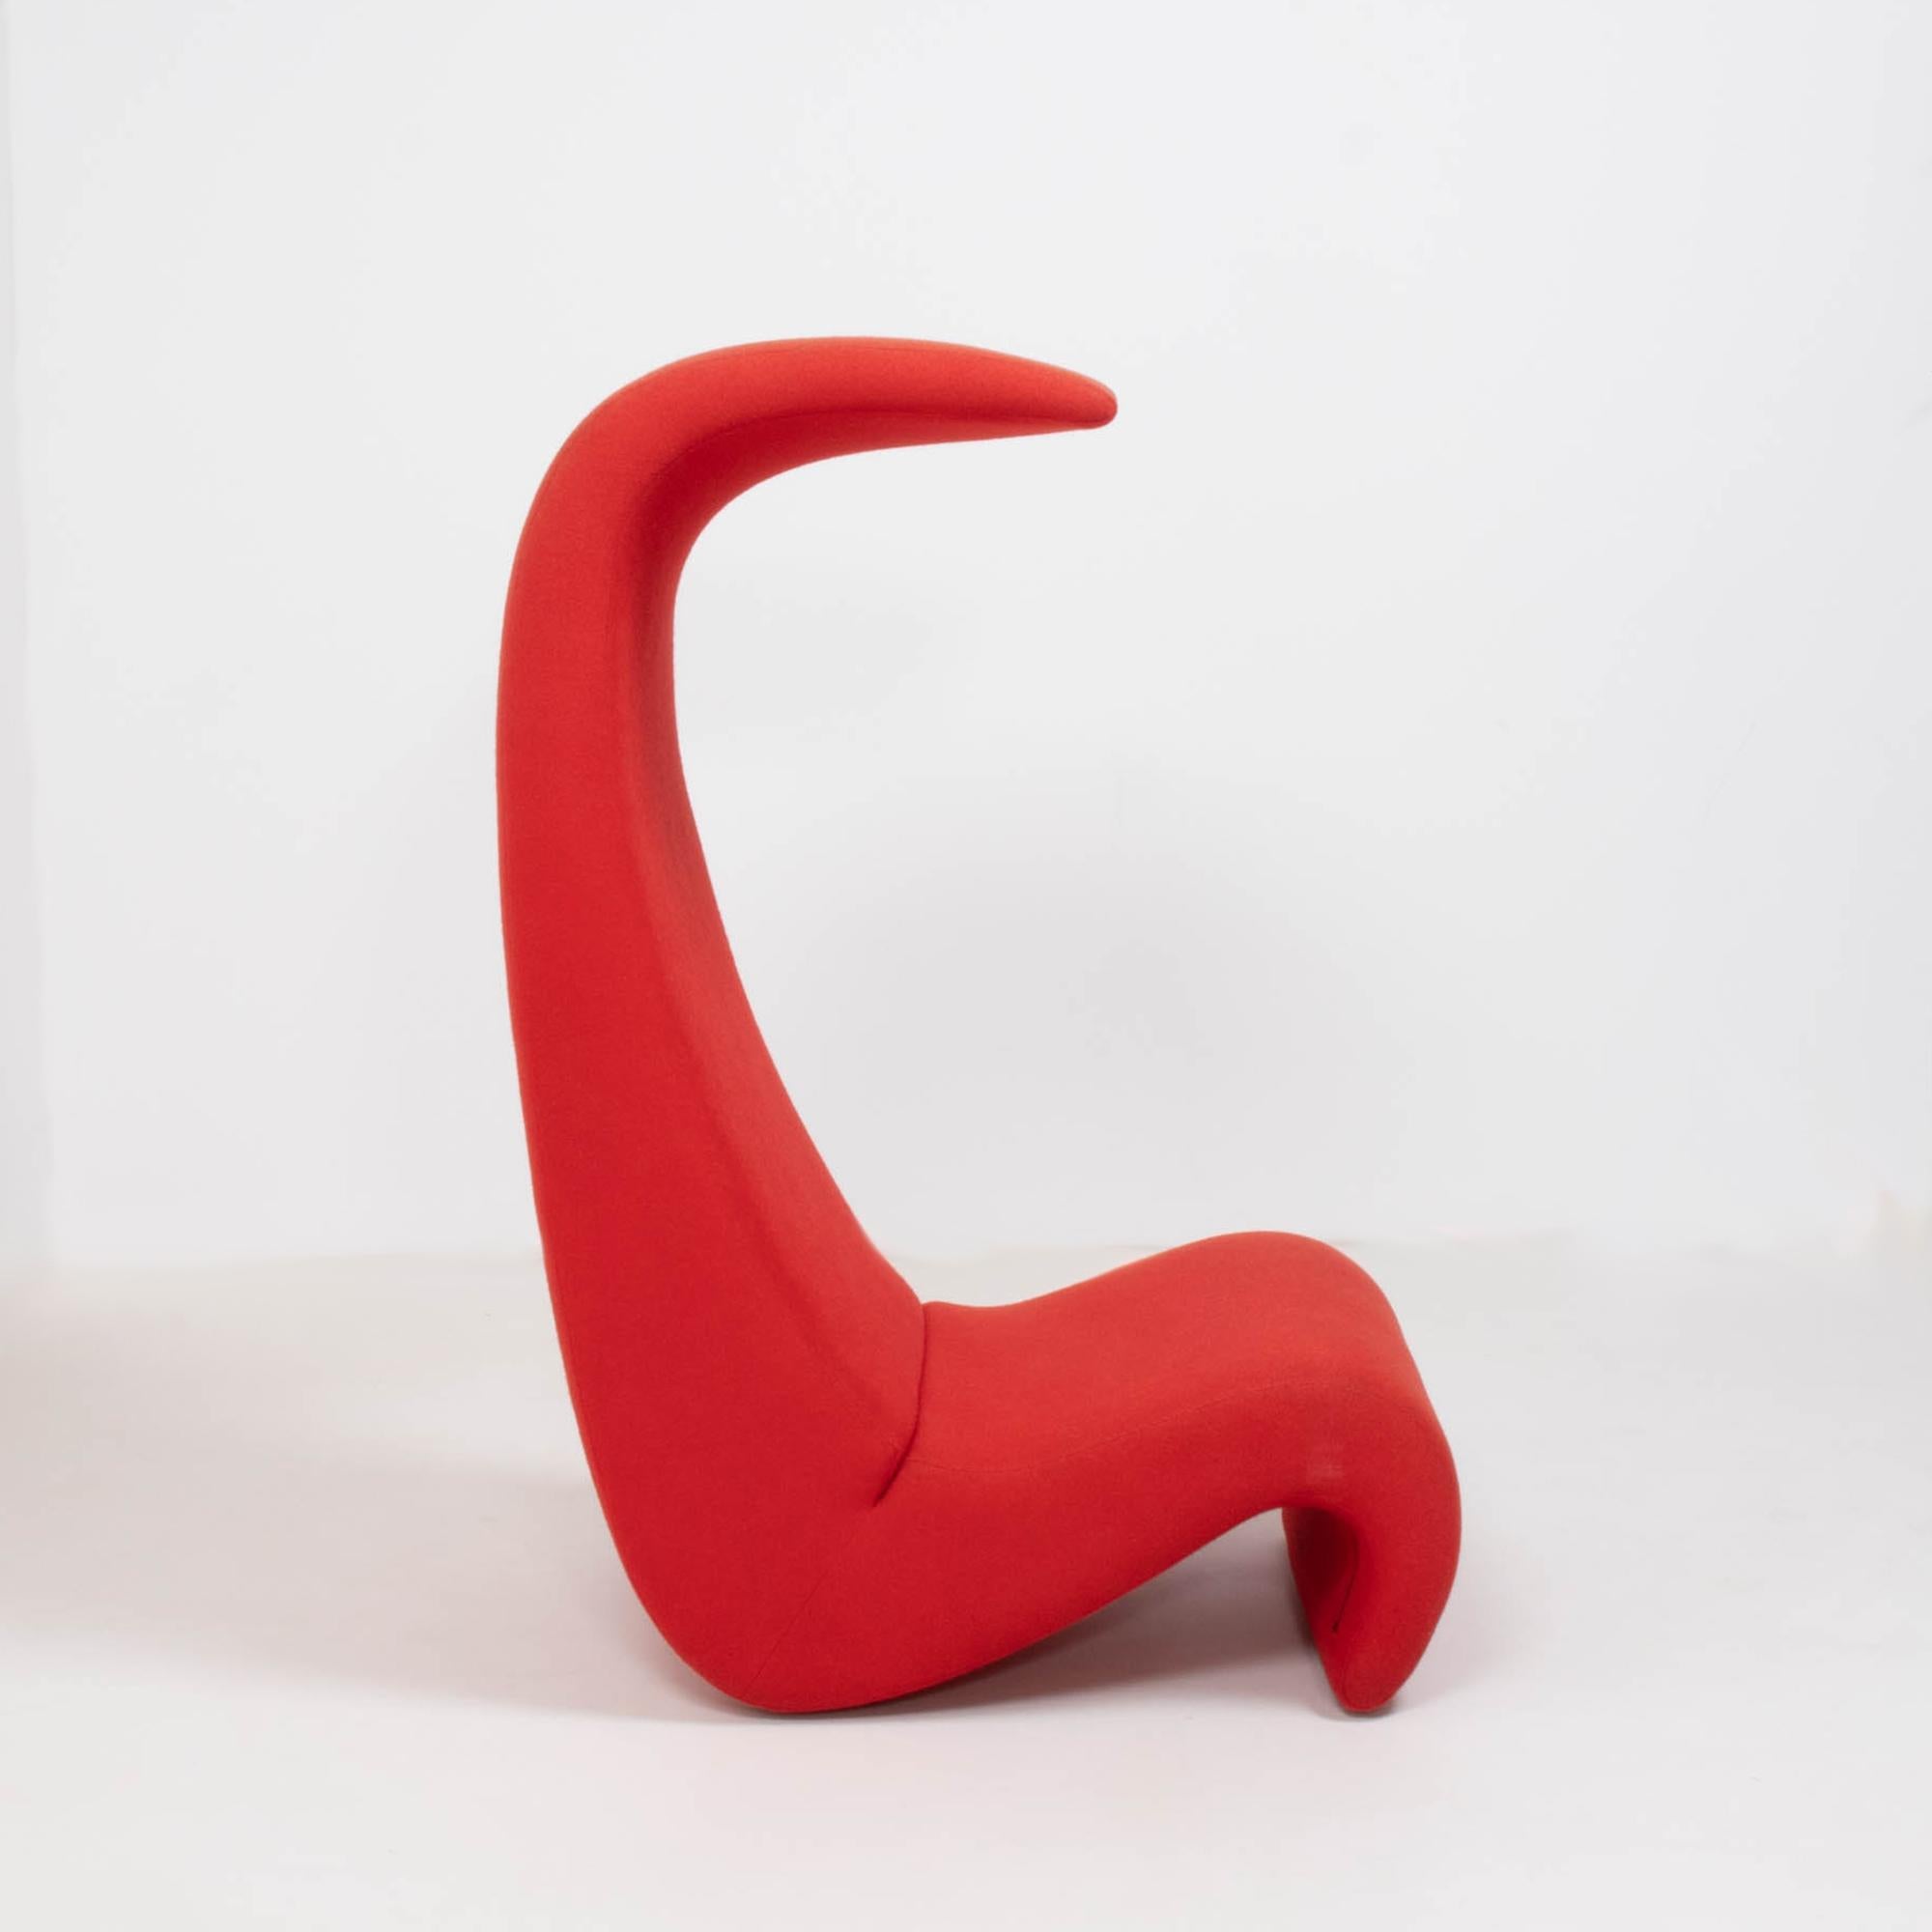 Originally designed by Verner Panton in 1970, the Amoebe Highback chair was created for the Visiona installation and has become a design icon.

Upholstered in bright red fabric, the sinuous curves create a bold and sculptural silhouette which also